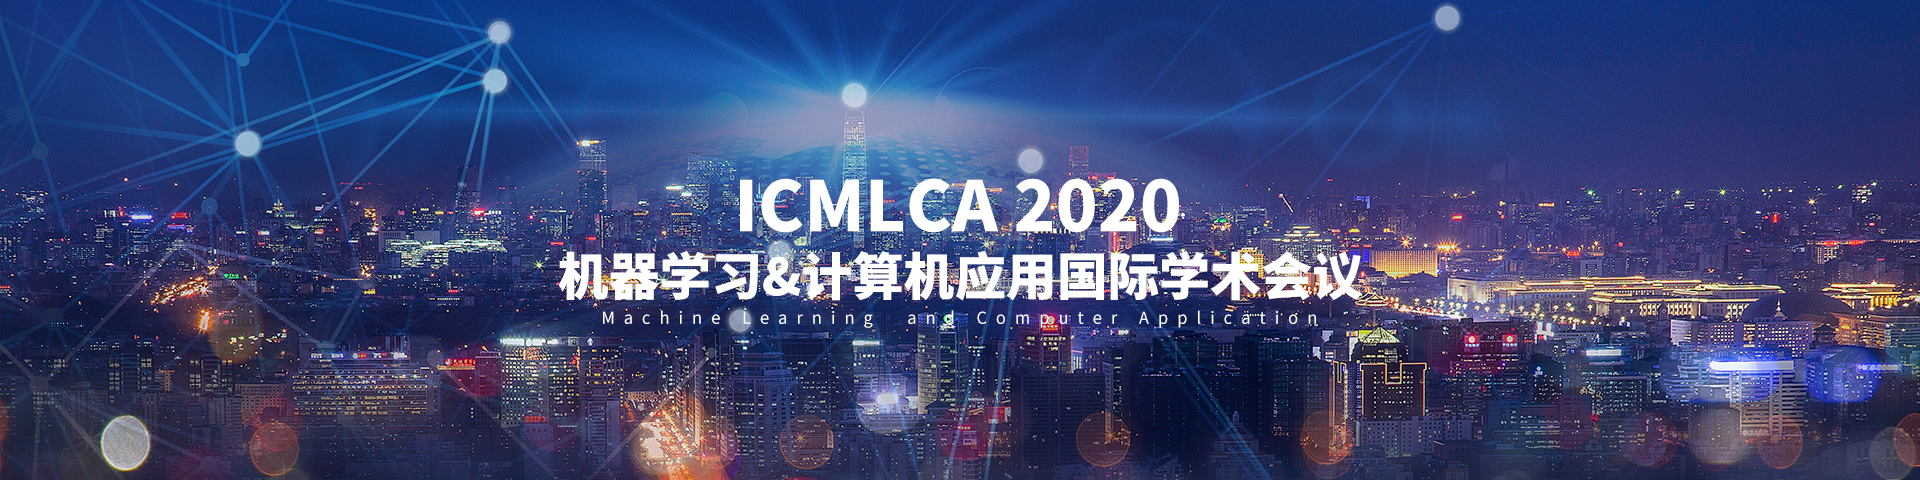 2020 International Conference on Machine Learning and Computer Application（ICMLCA 2020）, Shangri-La, Yunnan, China